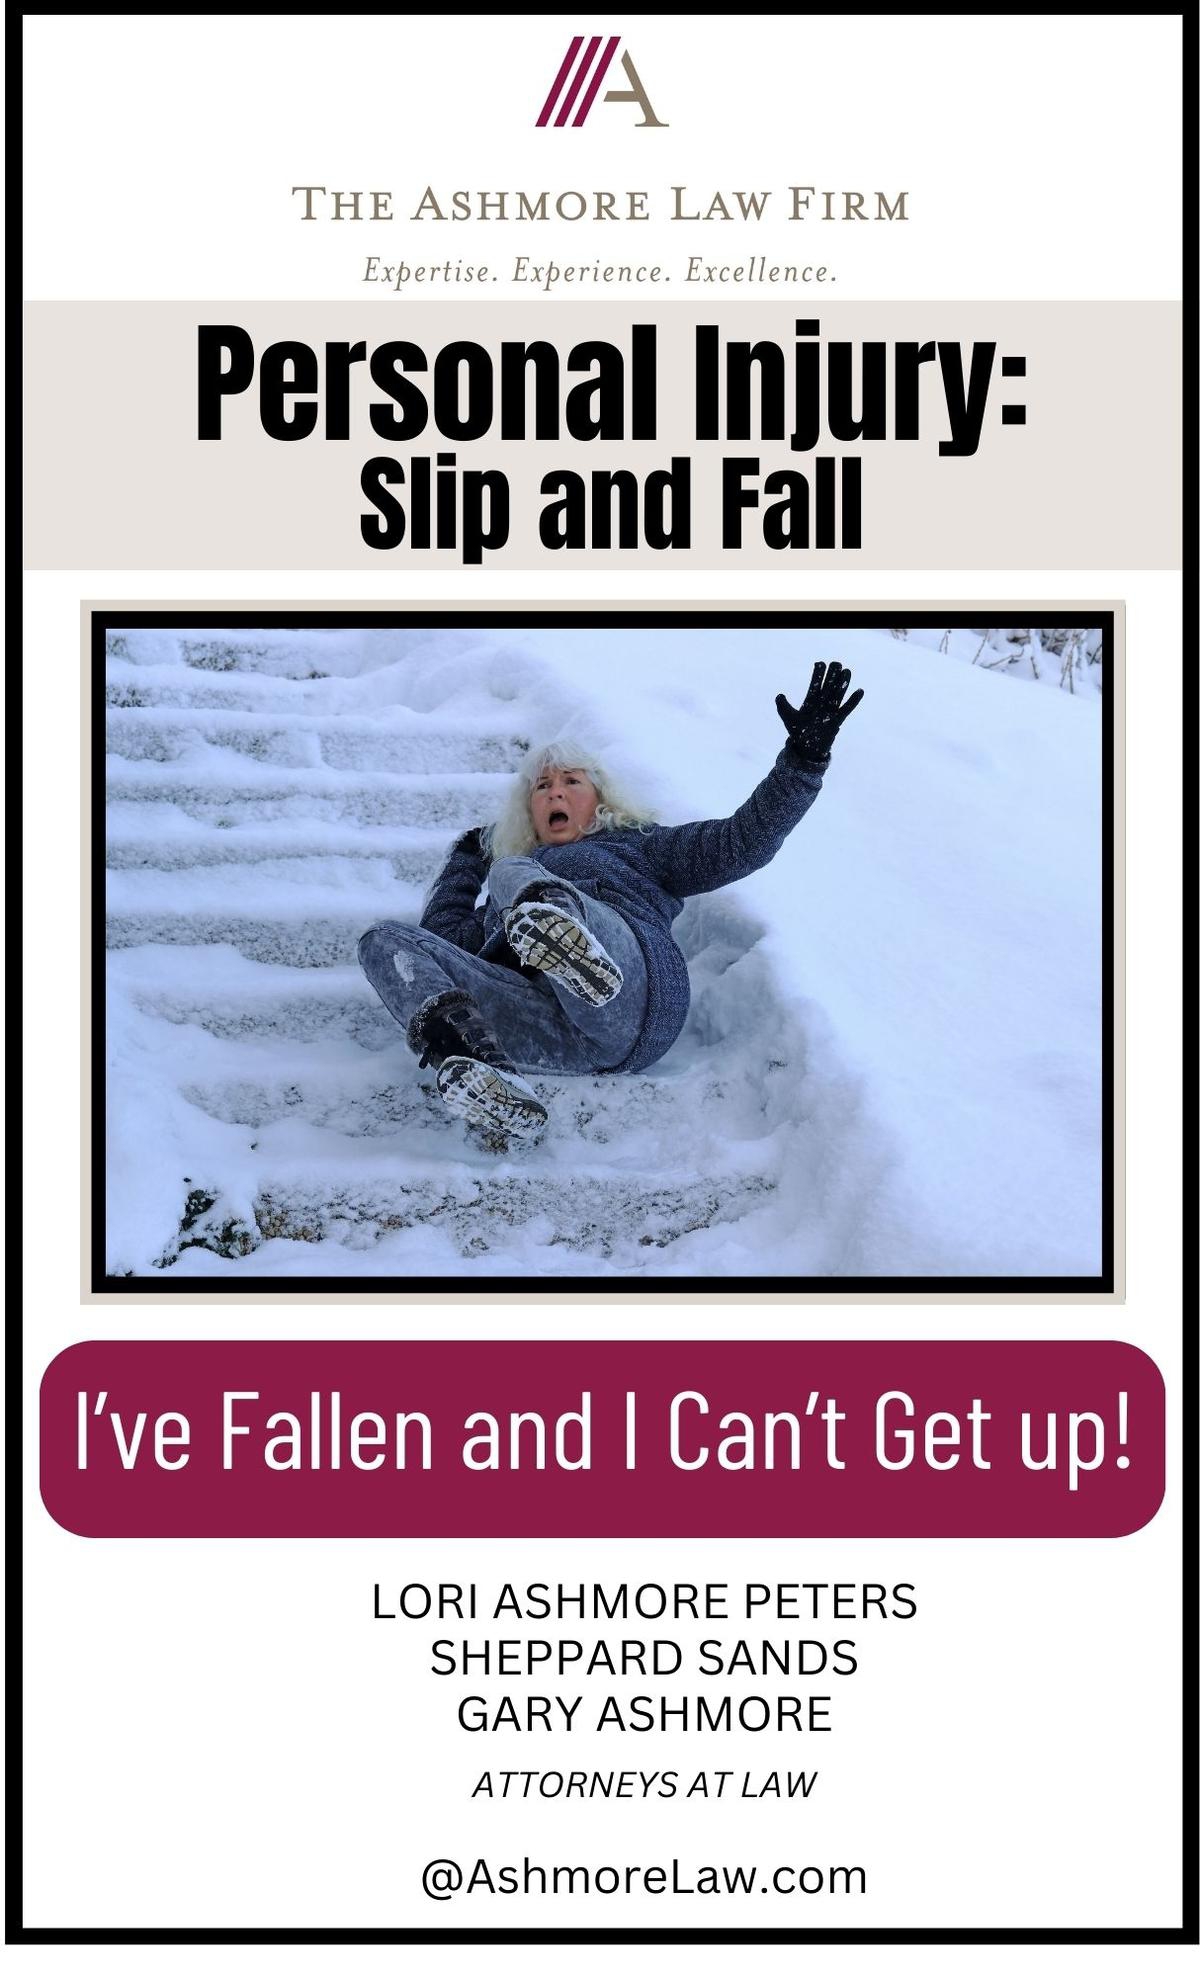 I've Fallen and I can't Get Up! - Slip and Fall Personal Injury |Dallas and Highland Park Personal Injury Attorney